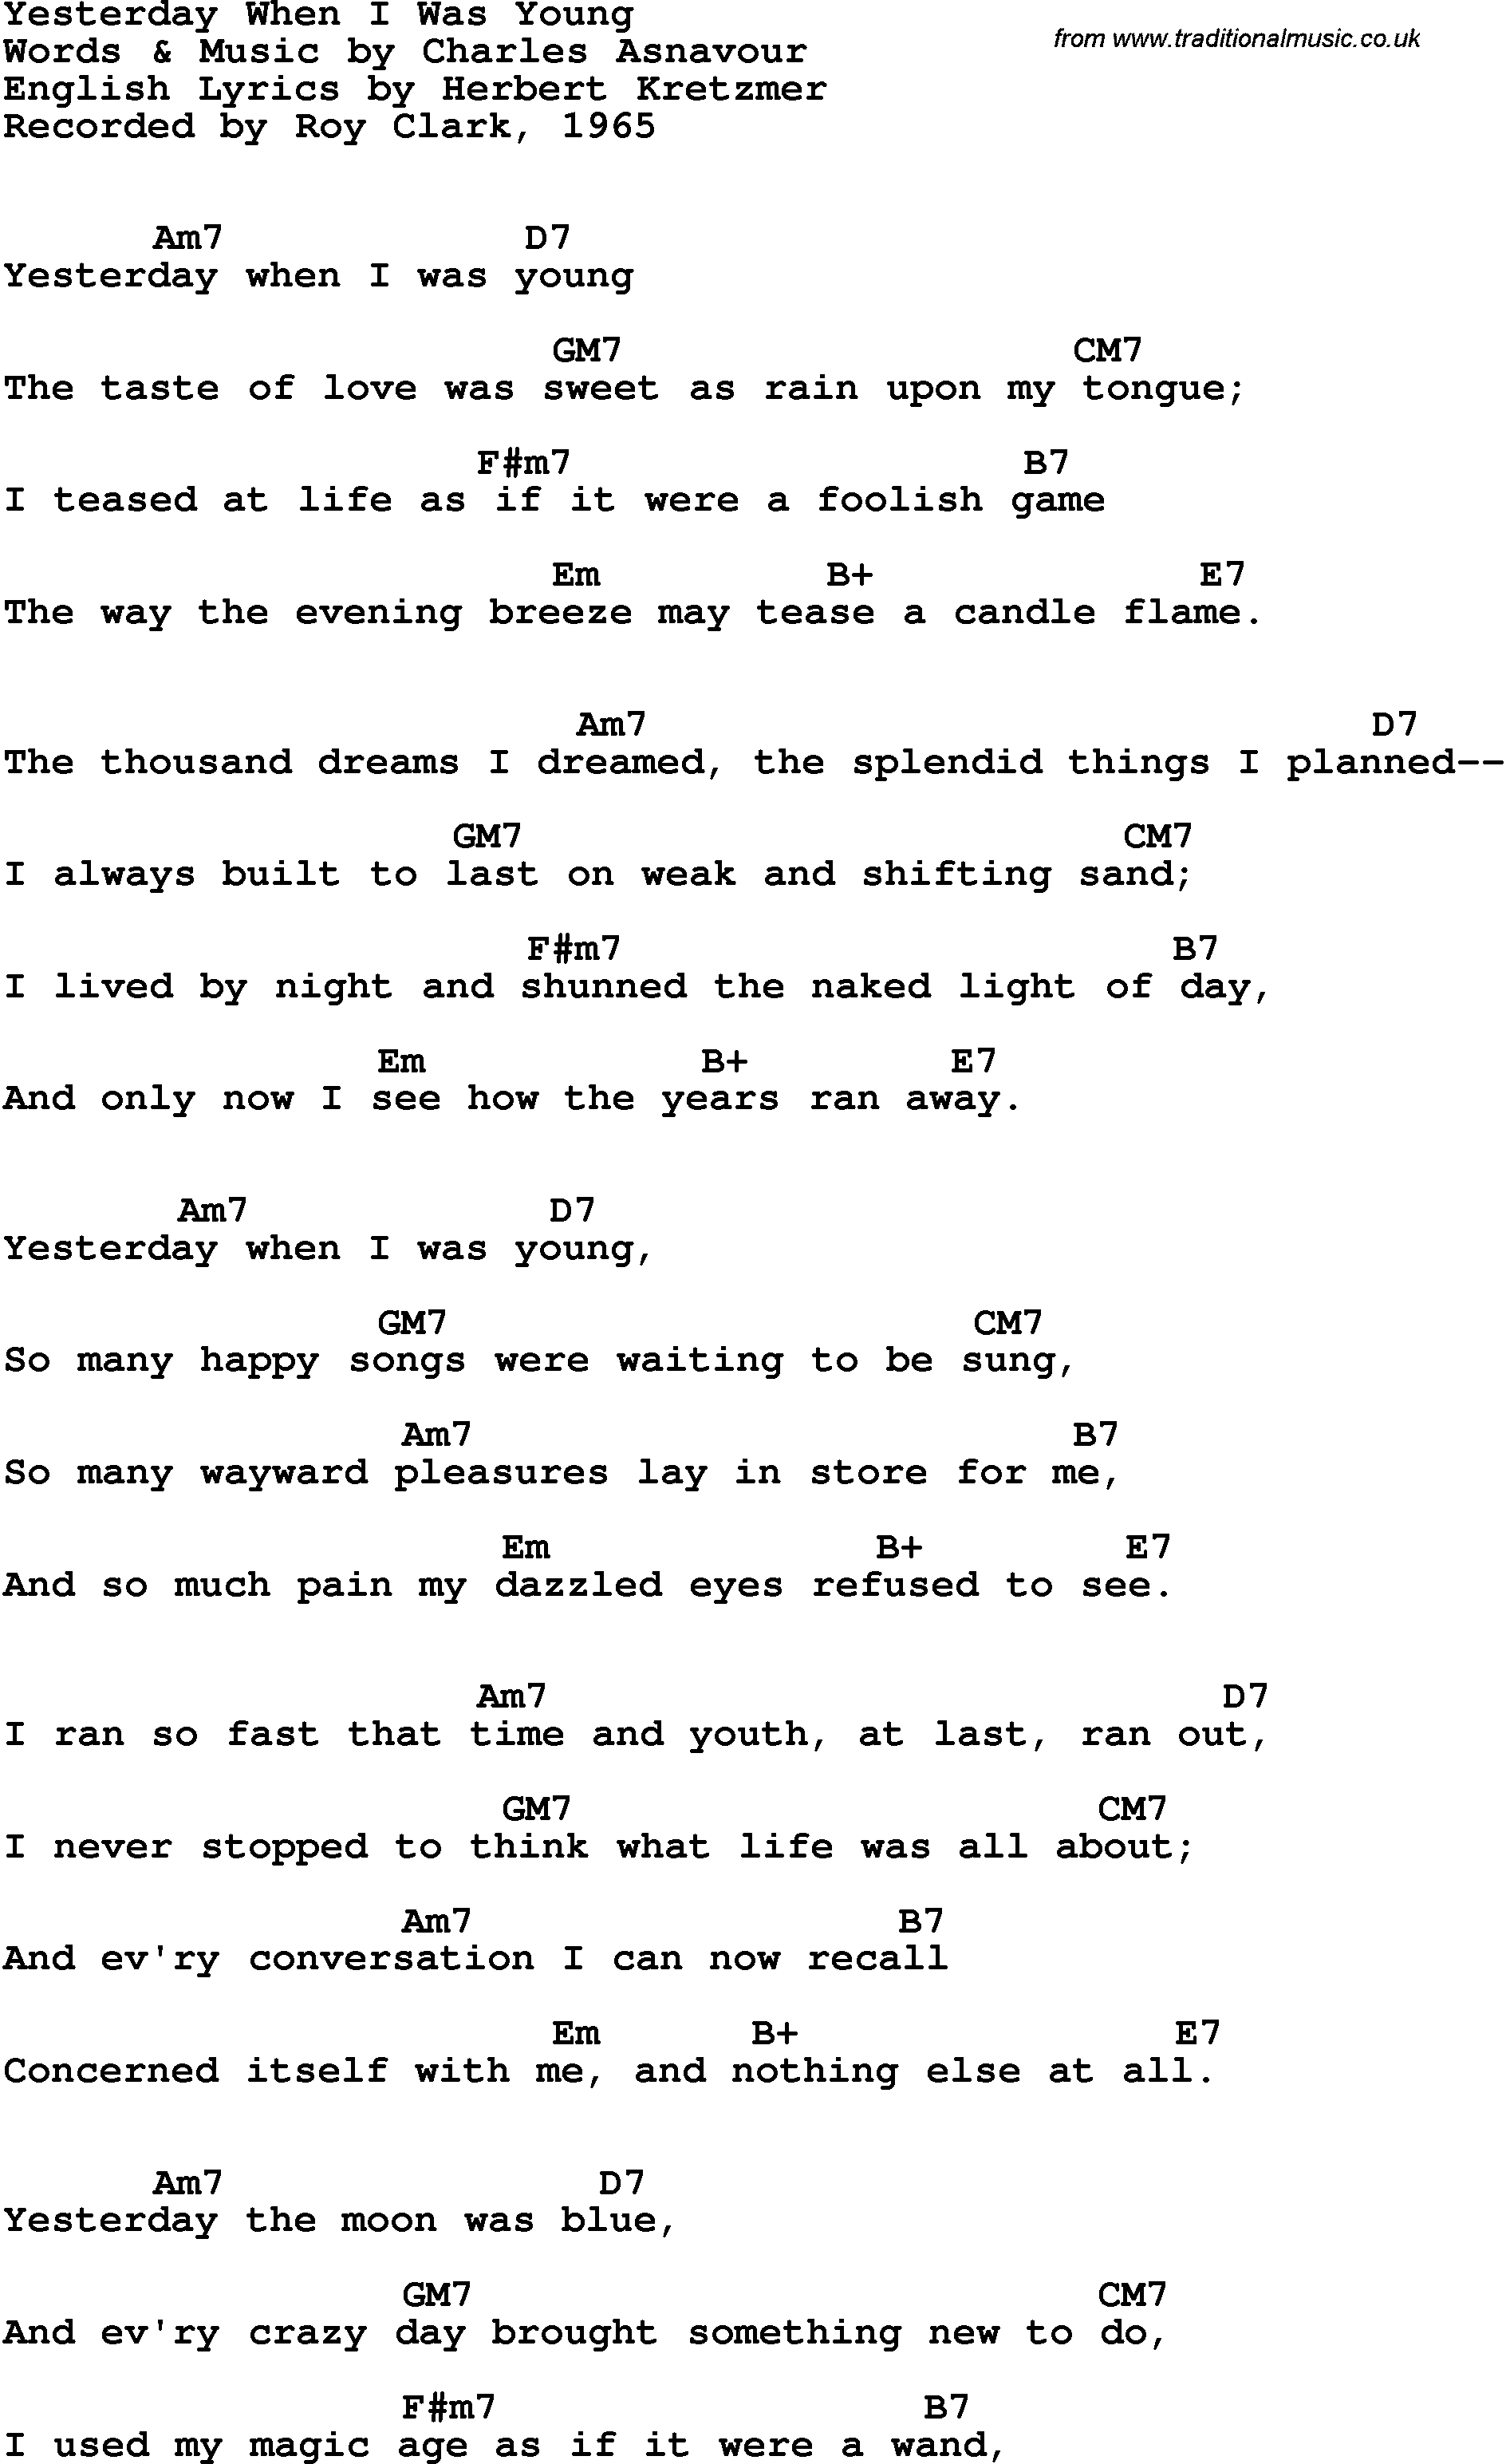 Song Lyrics with guitar chords for Yesterday When I Was Young - Roy Clark, 1966